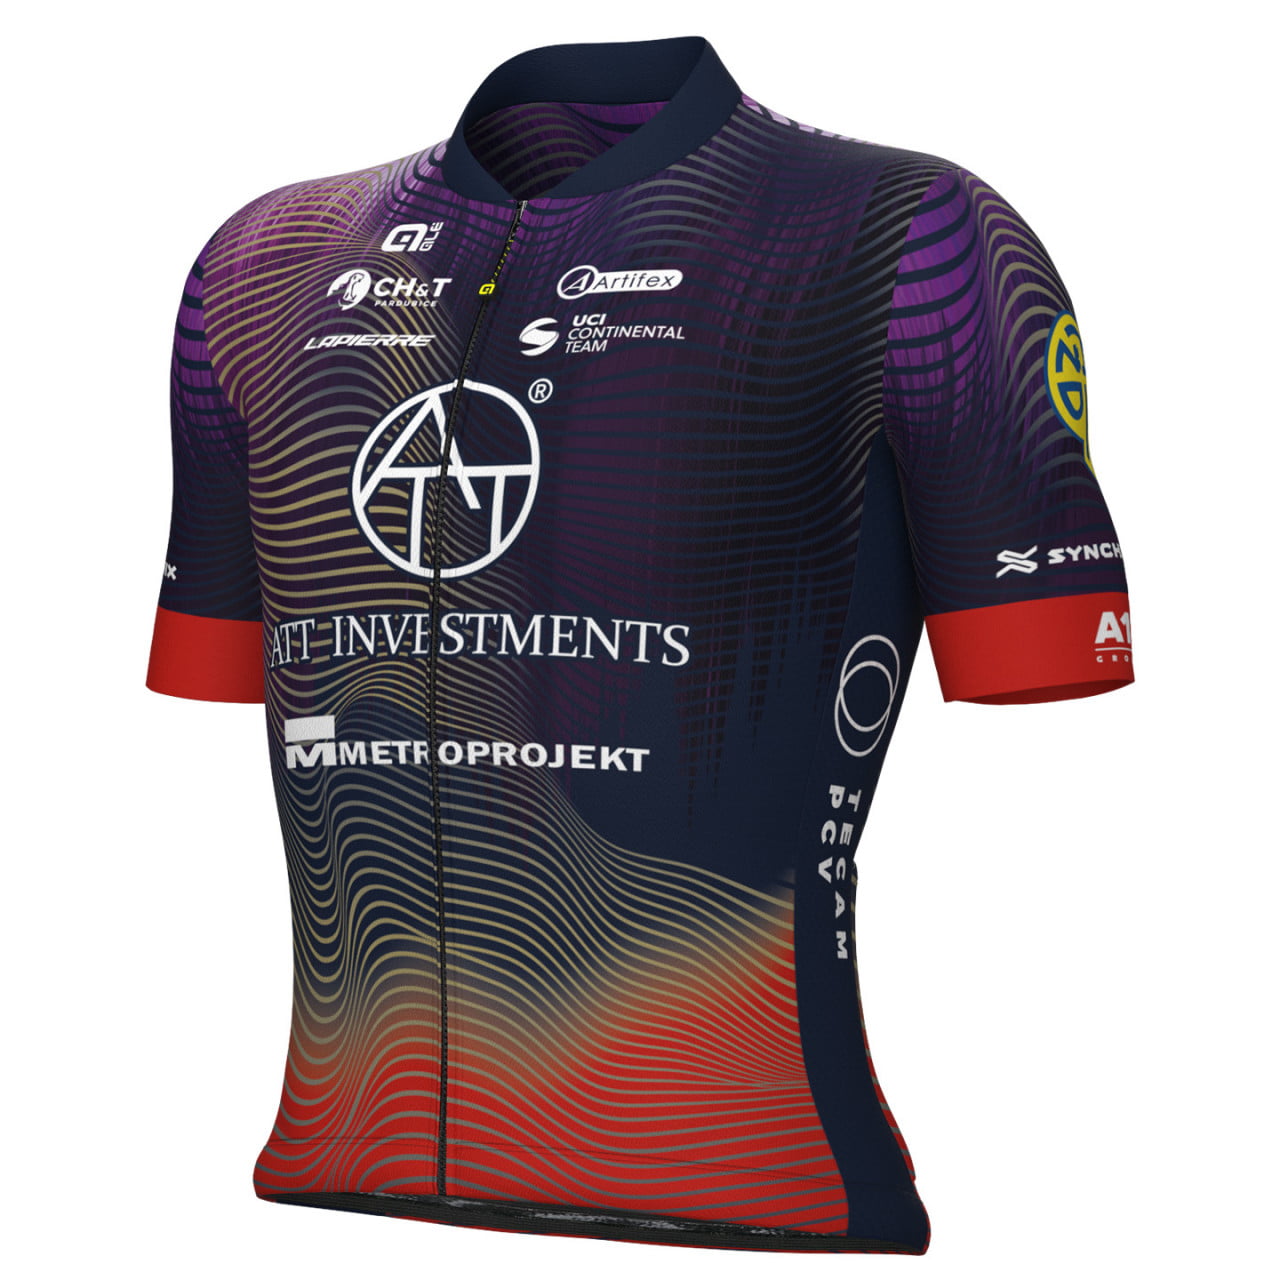 Maillot manches courtes ATT INVESTMENTS 2024